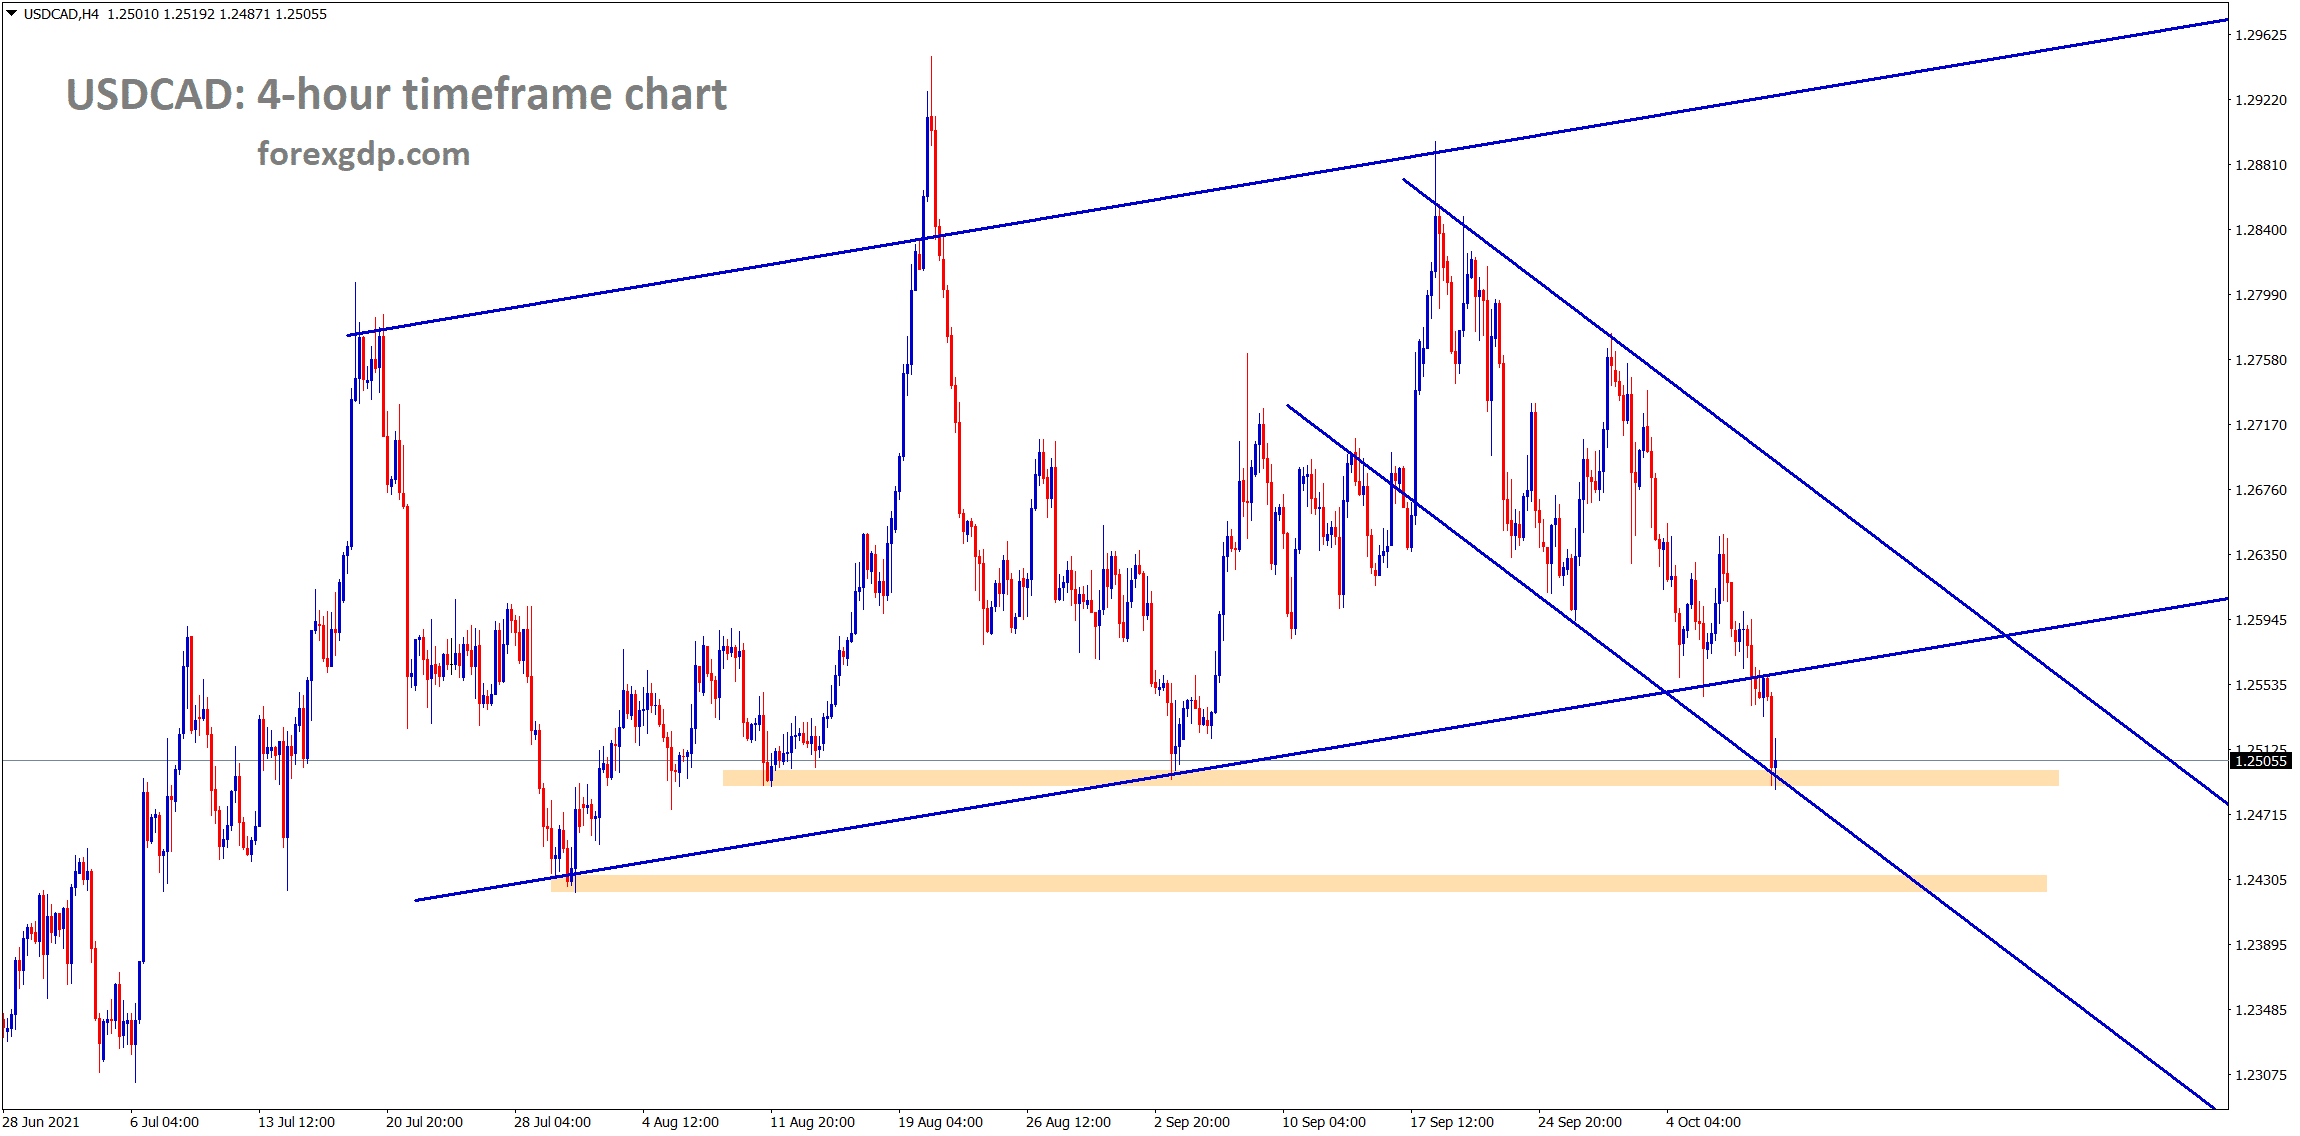 USDCAD has broken the higher low level of uptrend line however the market has reached the horizontal support and the lower low area of the descending channel